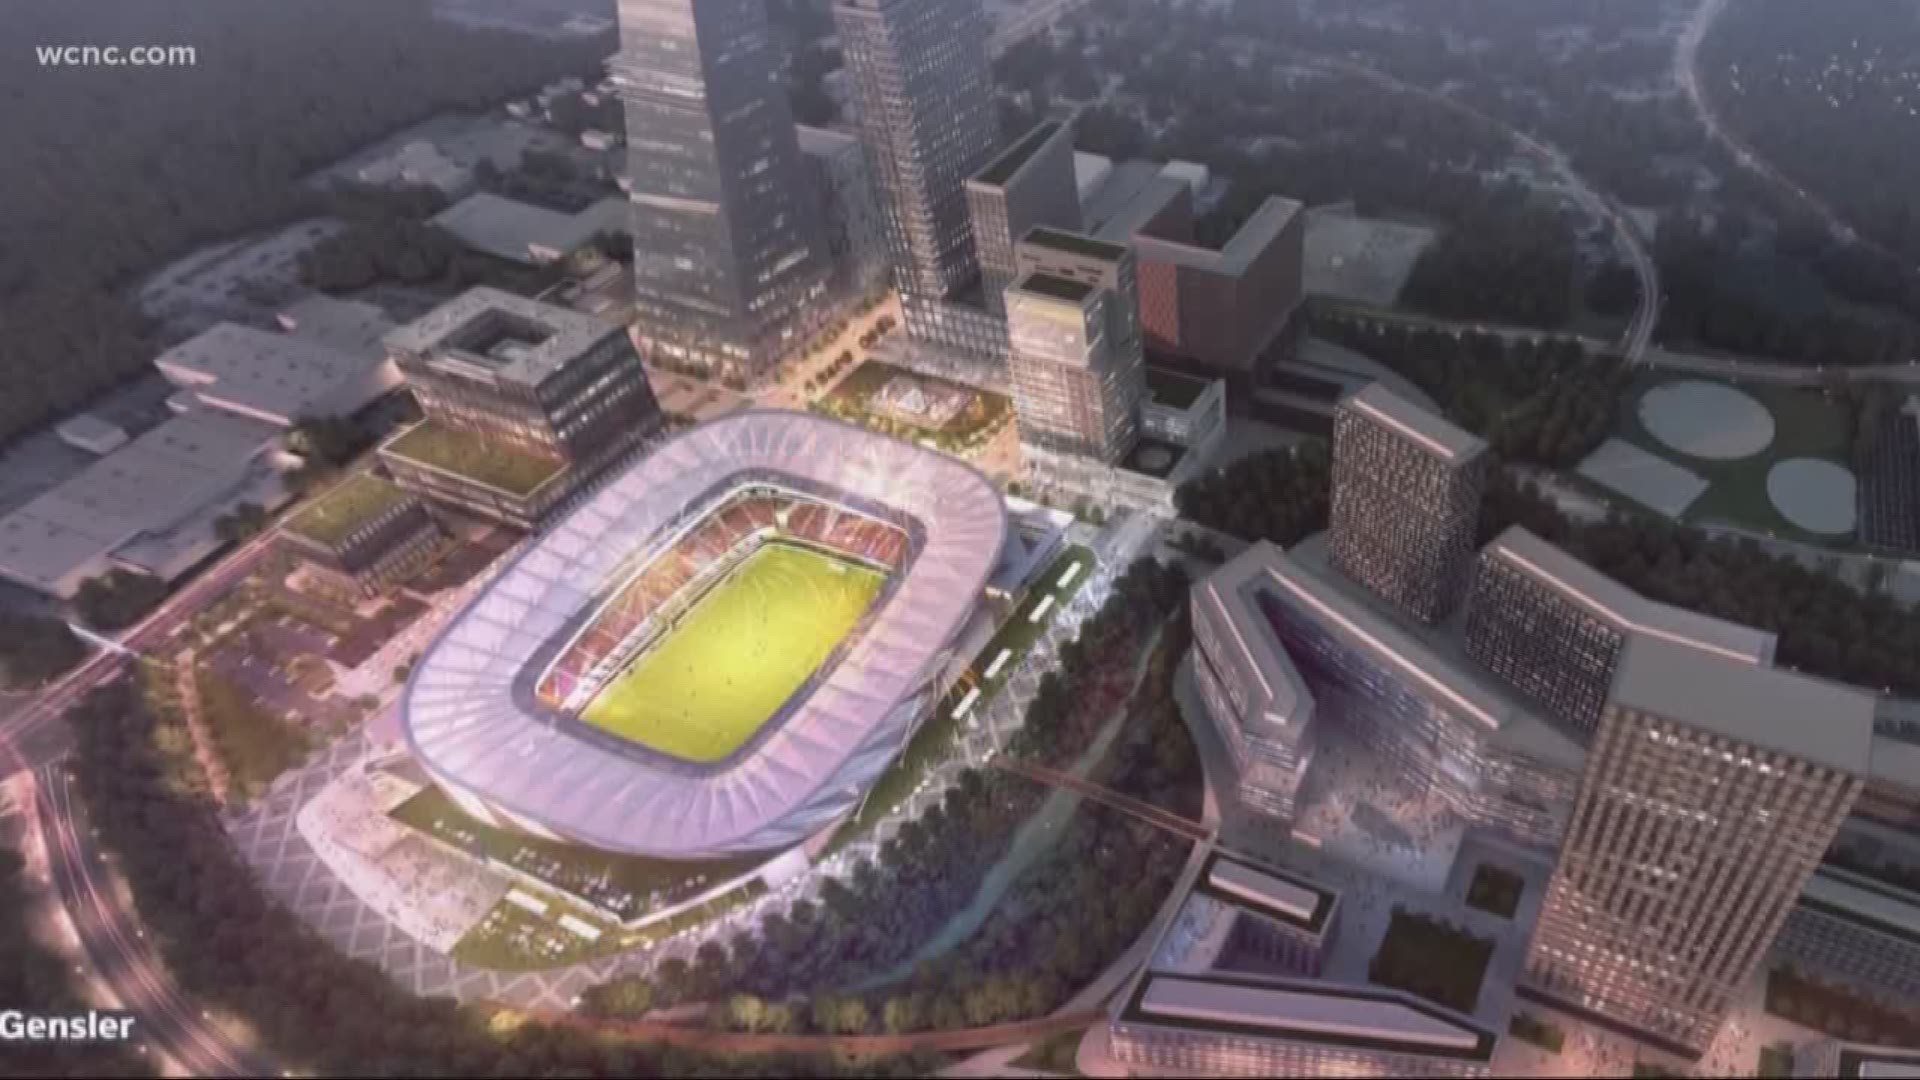 A pair of prominent businessmen revealed a plan for a 20,000 seat soccer stadium in downtown Raleigh.